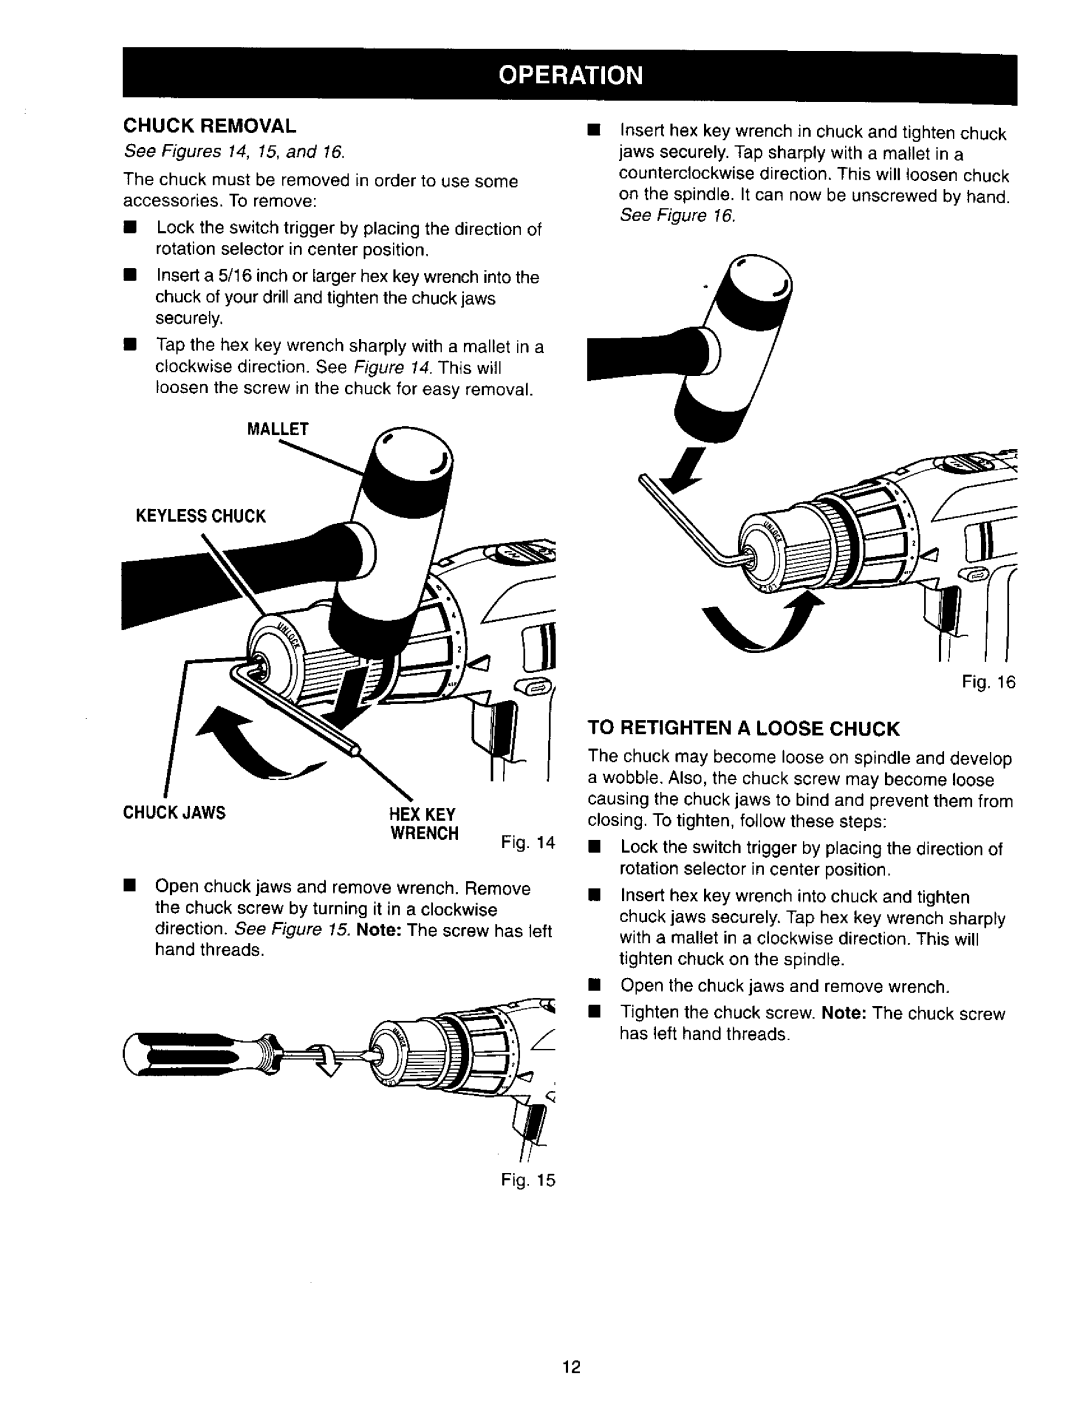 Craftsman 973.271830 owner manual Chuck Removal, See Figures 14, 15, and, Mallet Keyless Chuck Chuckjawshex Key Wrench 